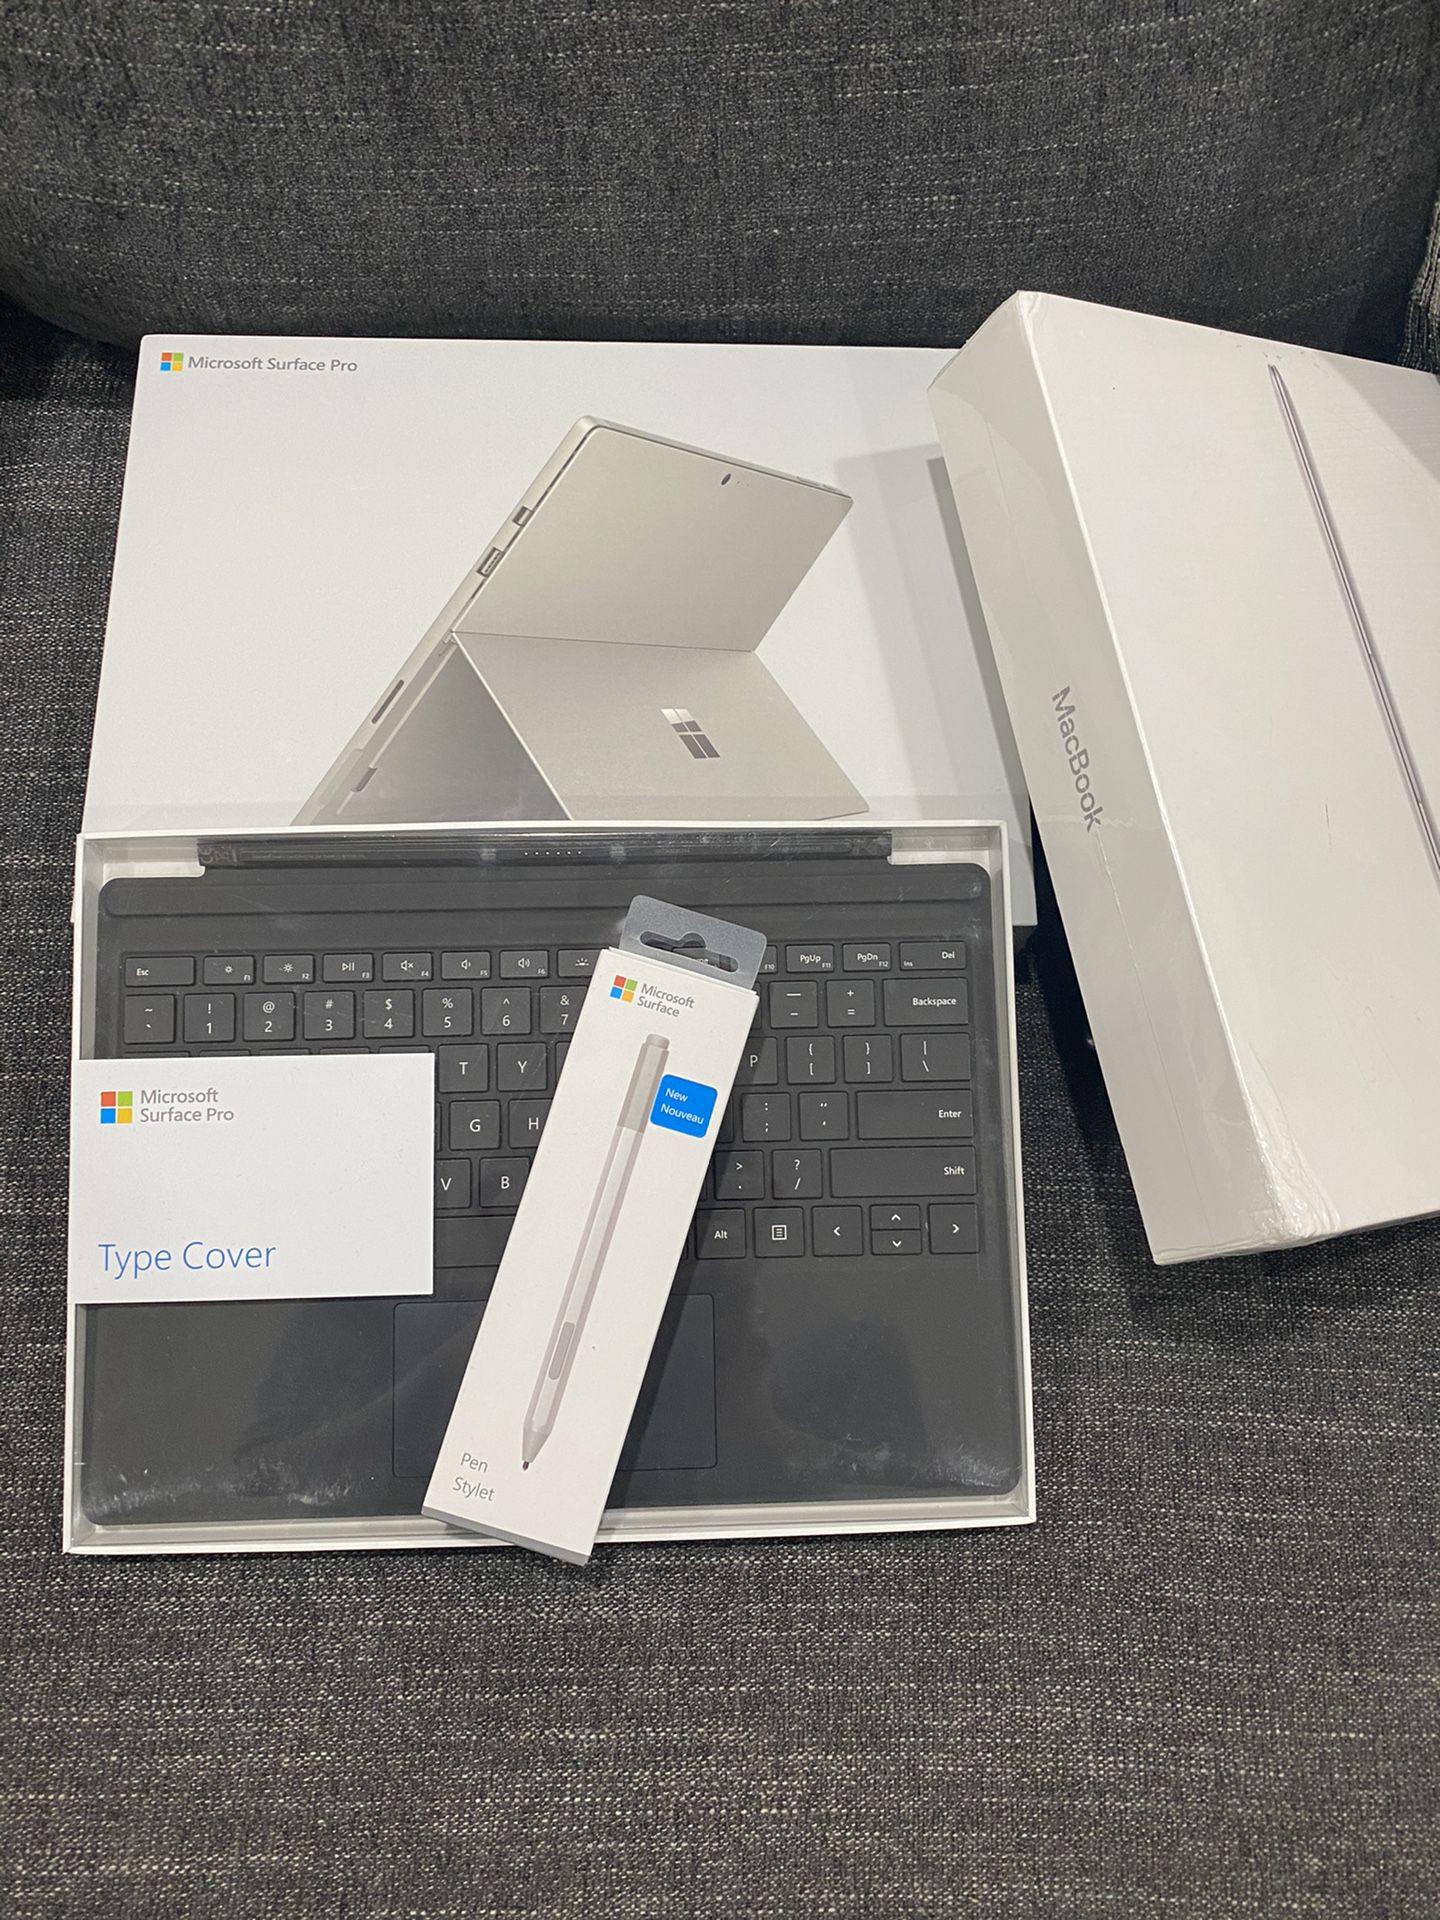 New Never opened MacBook Air / Surface Pro